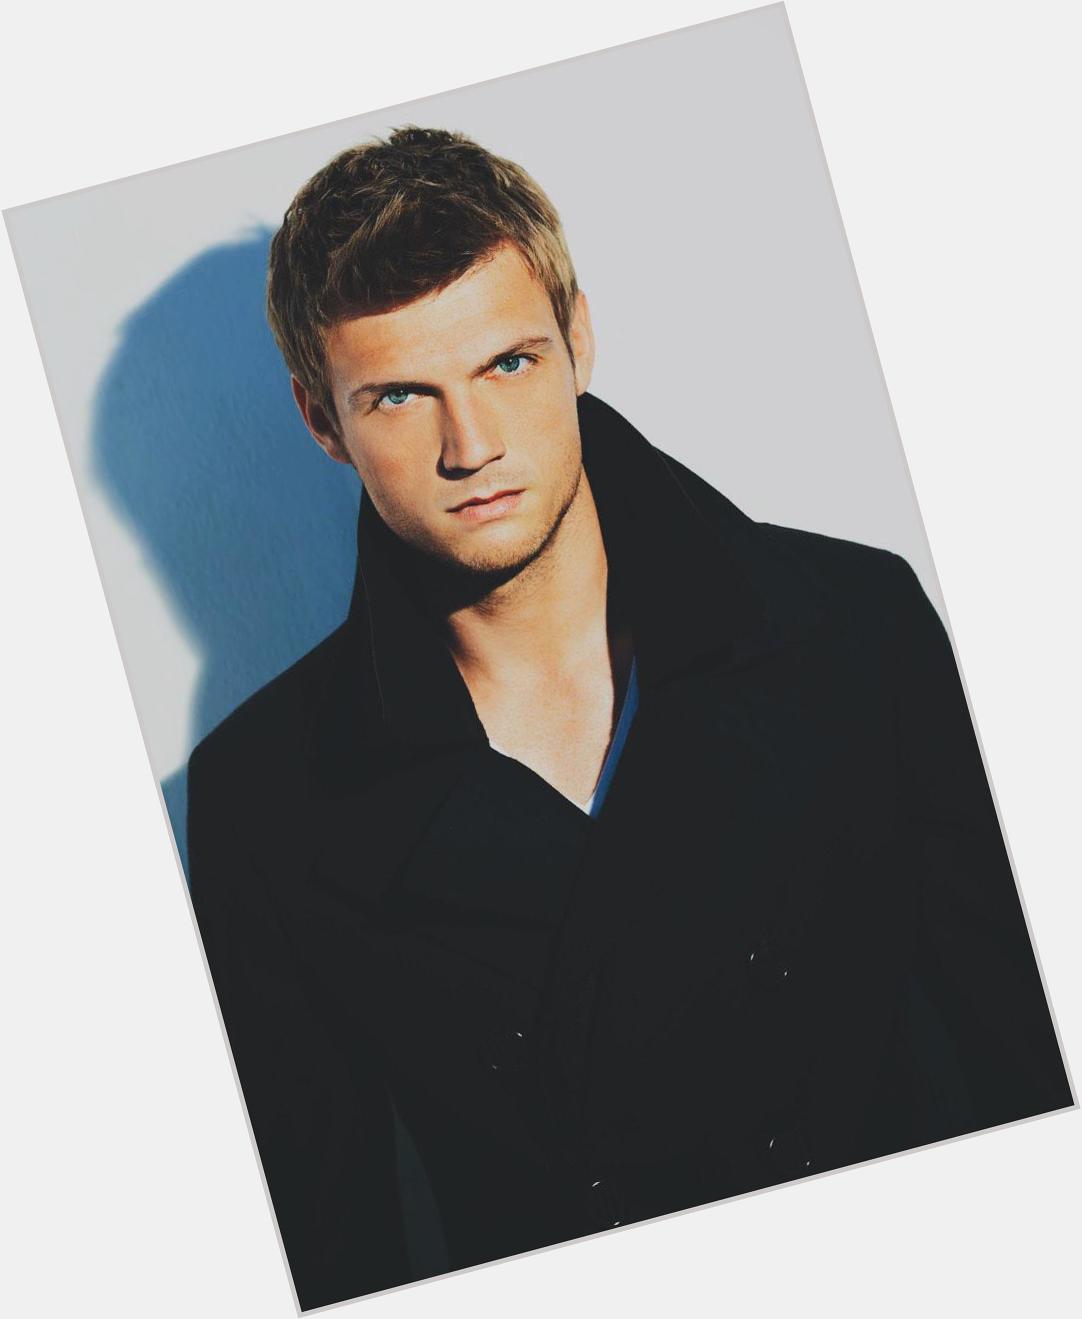 Happy Birthday to member of the super popular boy band Backstreet Boys - Nick Carter! Which is your fav BSB song? 